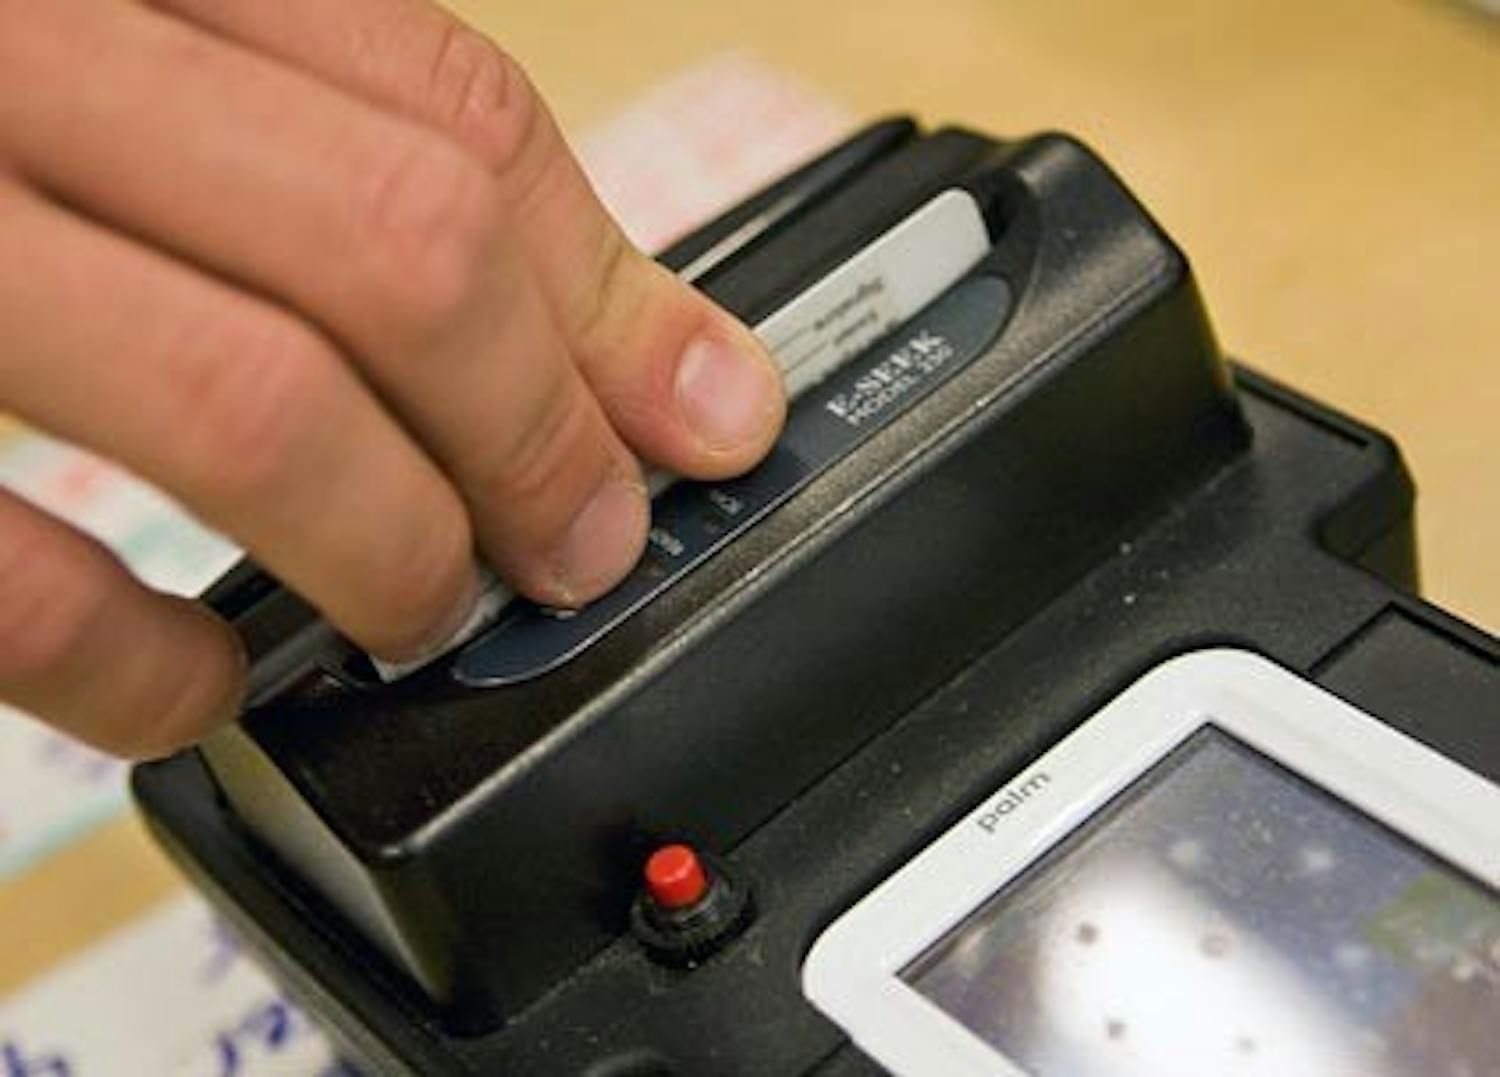 UW-funded ID scanners hit local liquor stores